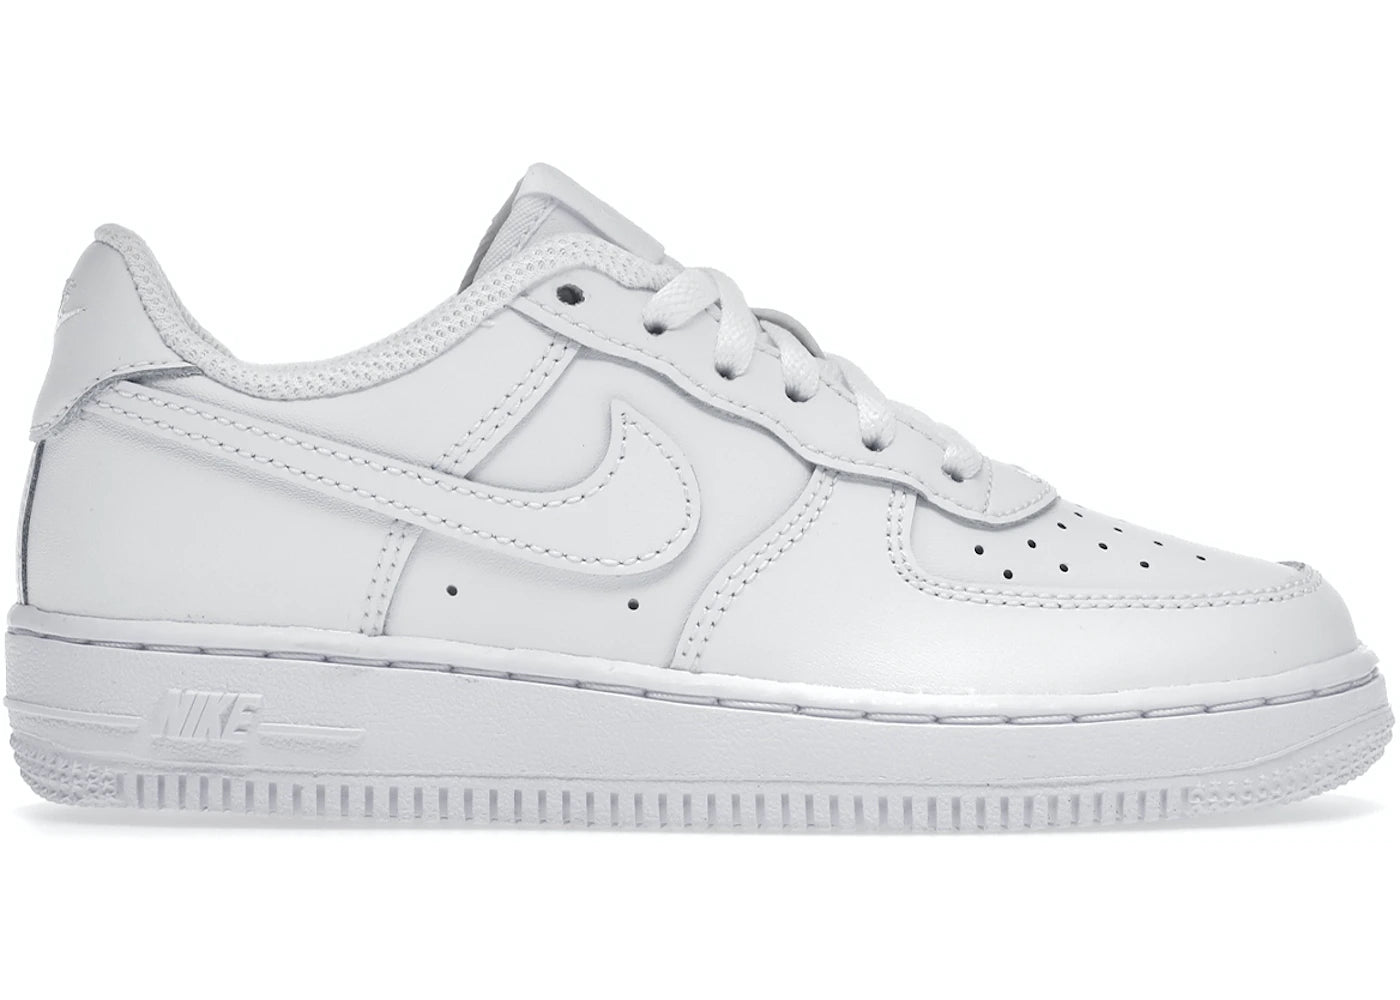 Nike Air Force 1 Low "White" PS